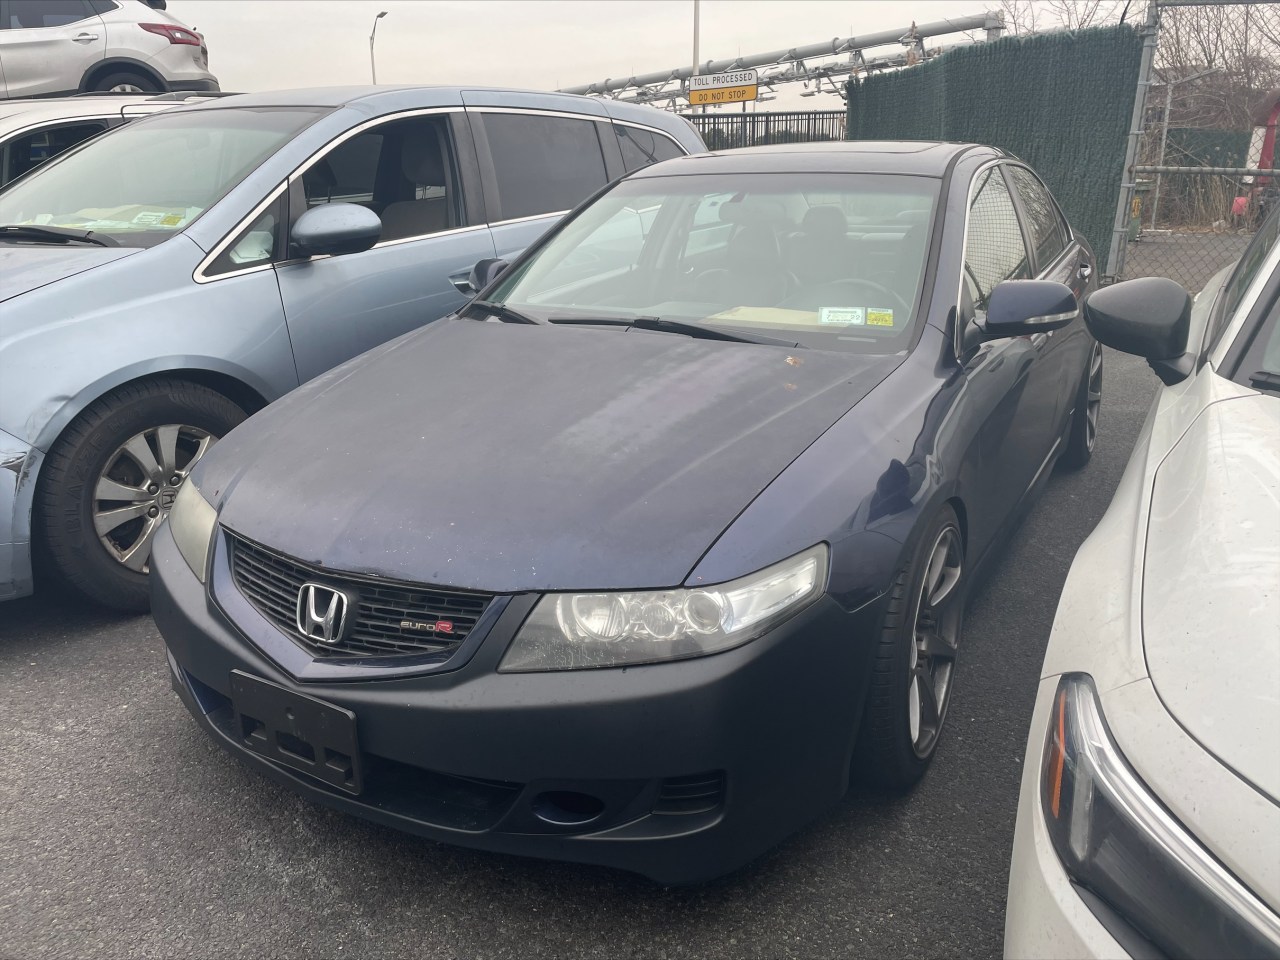 An Acura, rebranded as a Honda, whose driver incurred $59,000 of tolls and late fees. Photo: MTA